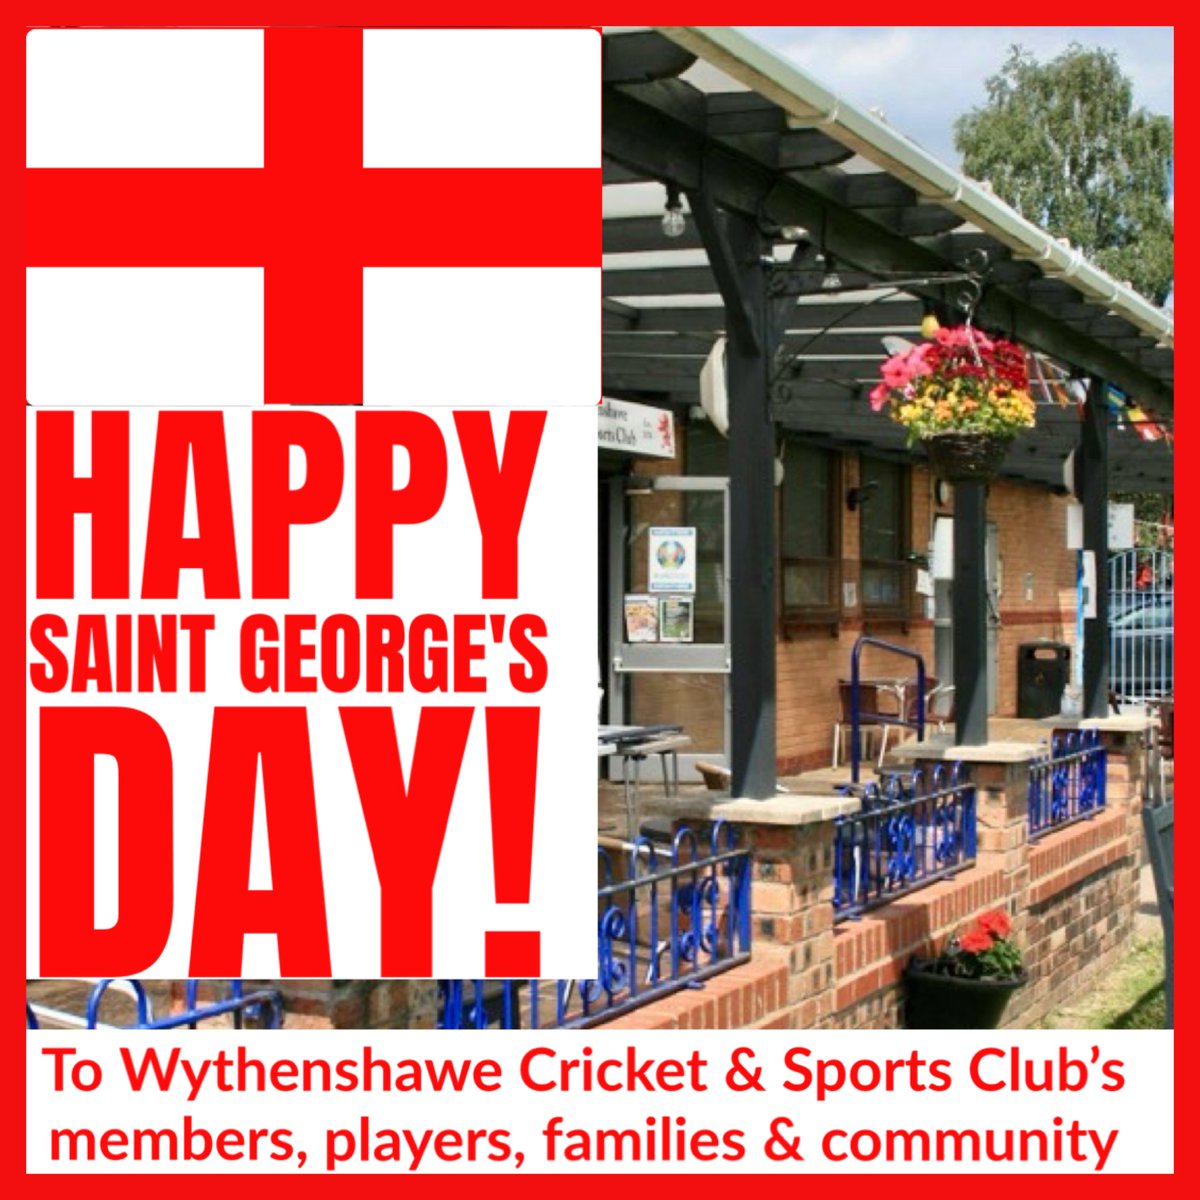 Happy St. George’s Day to our members, players, their families & our community, from Wythenshawe Cricket & Sports Club 🏴󠁧󠁢󠁥󠁮󠁧󠁿 🐉